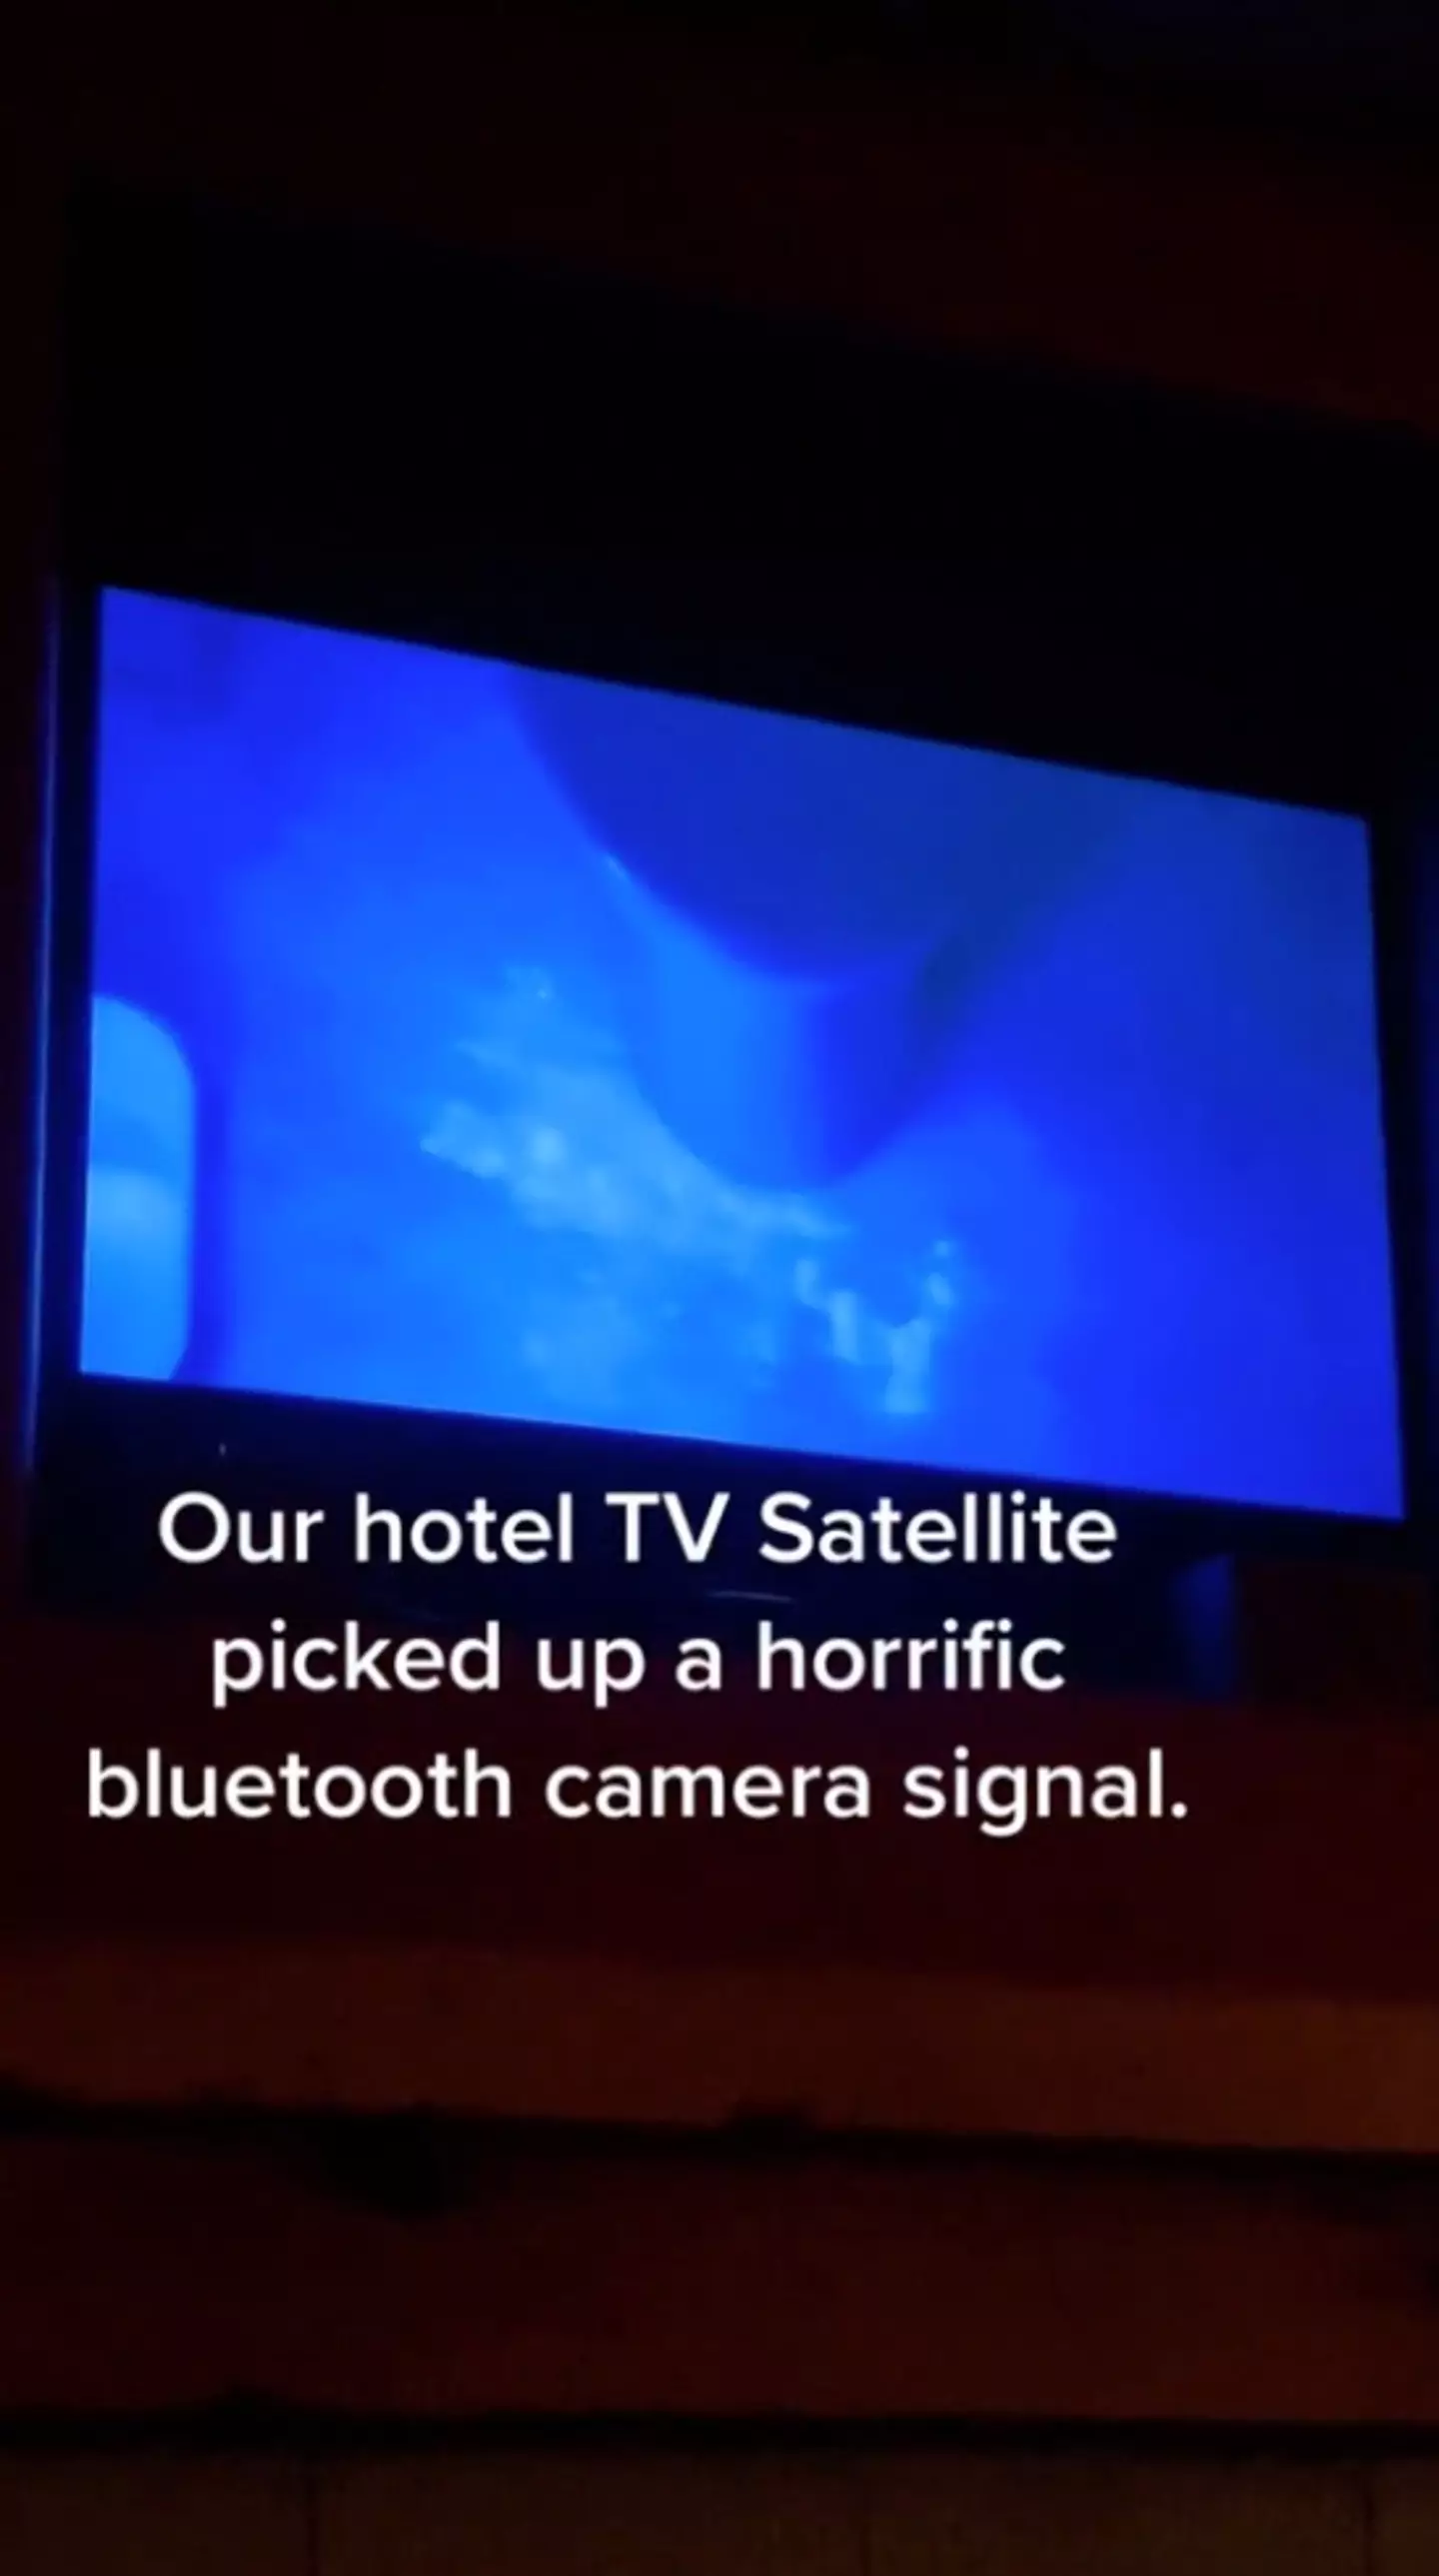 A hotel TV picked up a disturbing 'crotch shot' camera angle of a 'hotel toilet', which prompted a call to police.